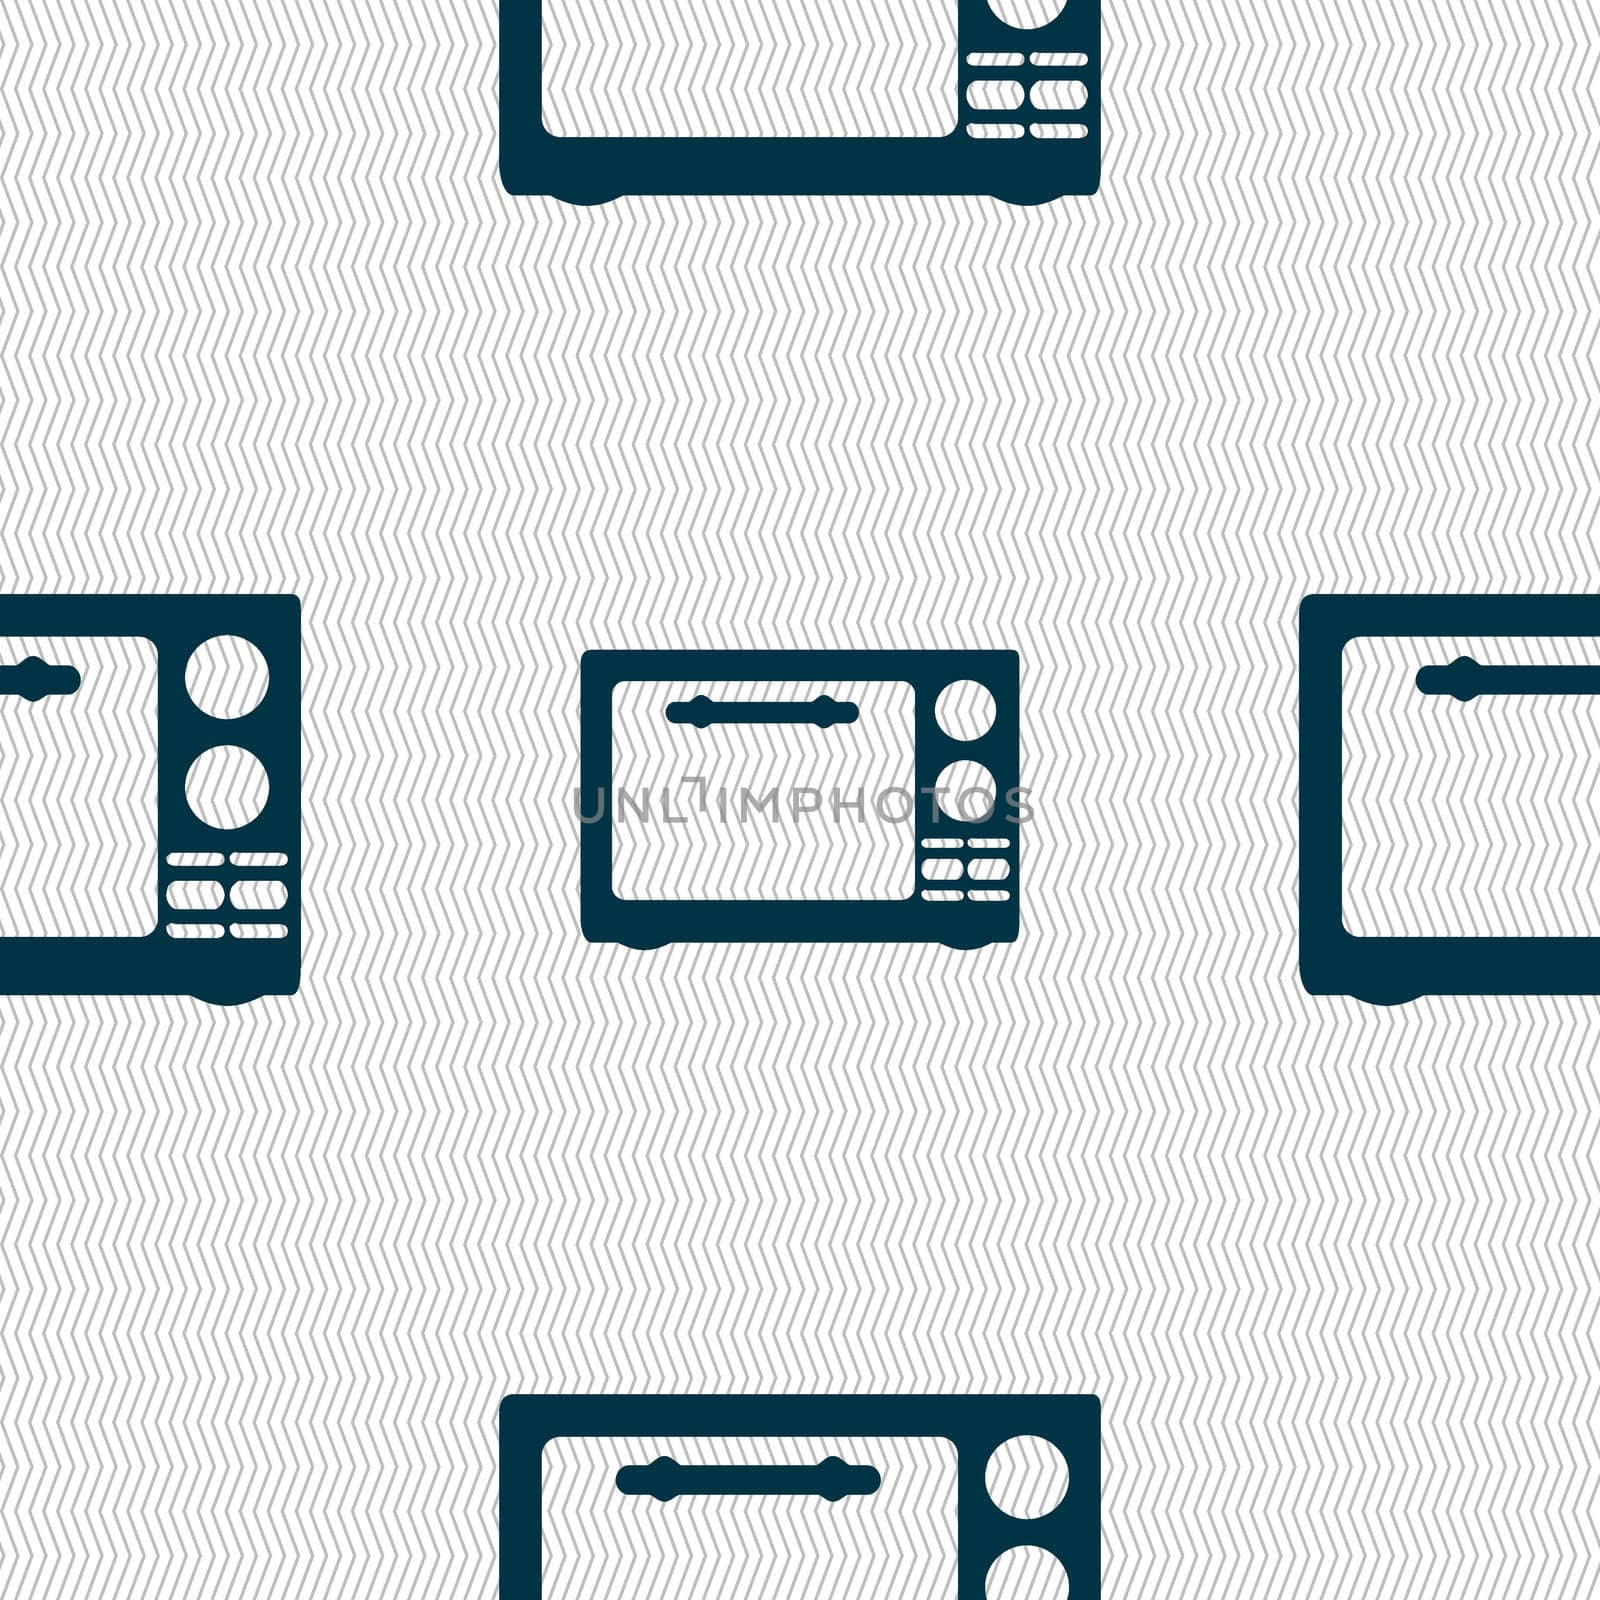 Microwave oven sign icon. Kitchen electric stove symbol. Seamless abstract background with geometric shapes. illustration